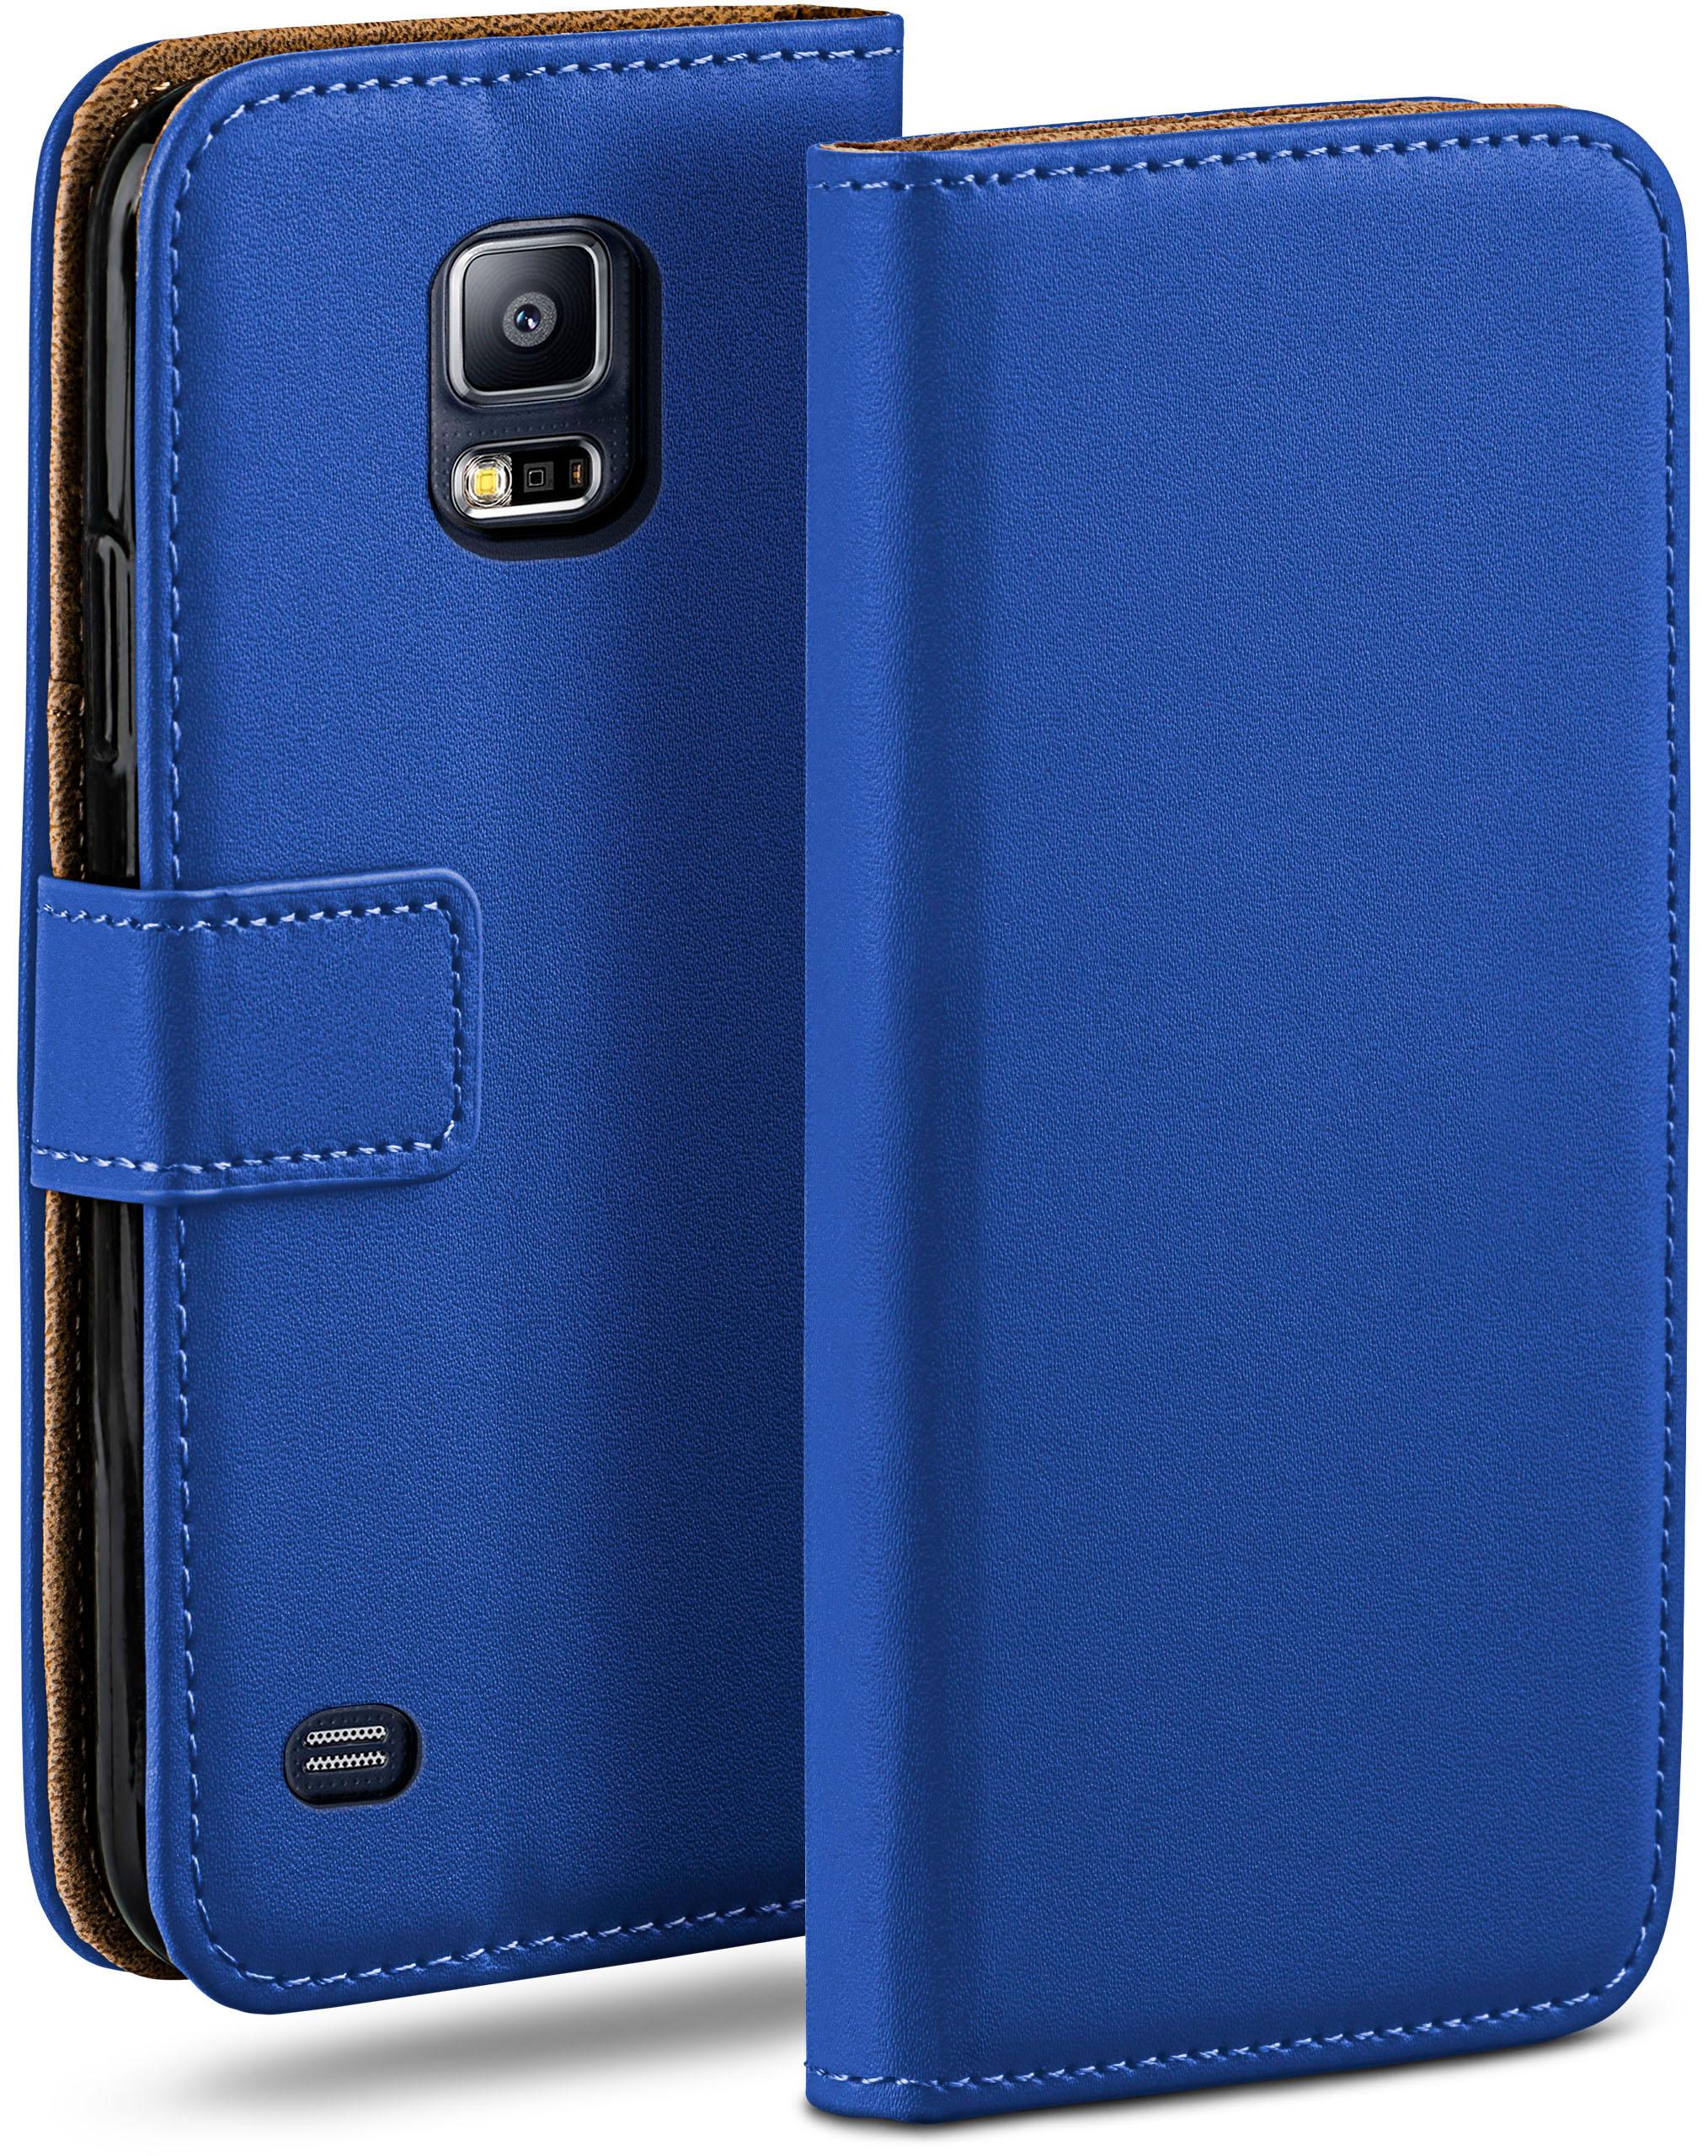 MOEX Book Neo, Royal-Blue Bookcover, Samsung, Case, S5 S5 Galaxy 